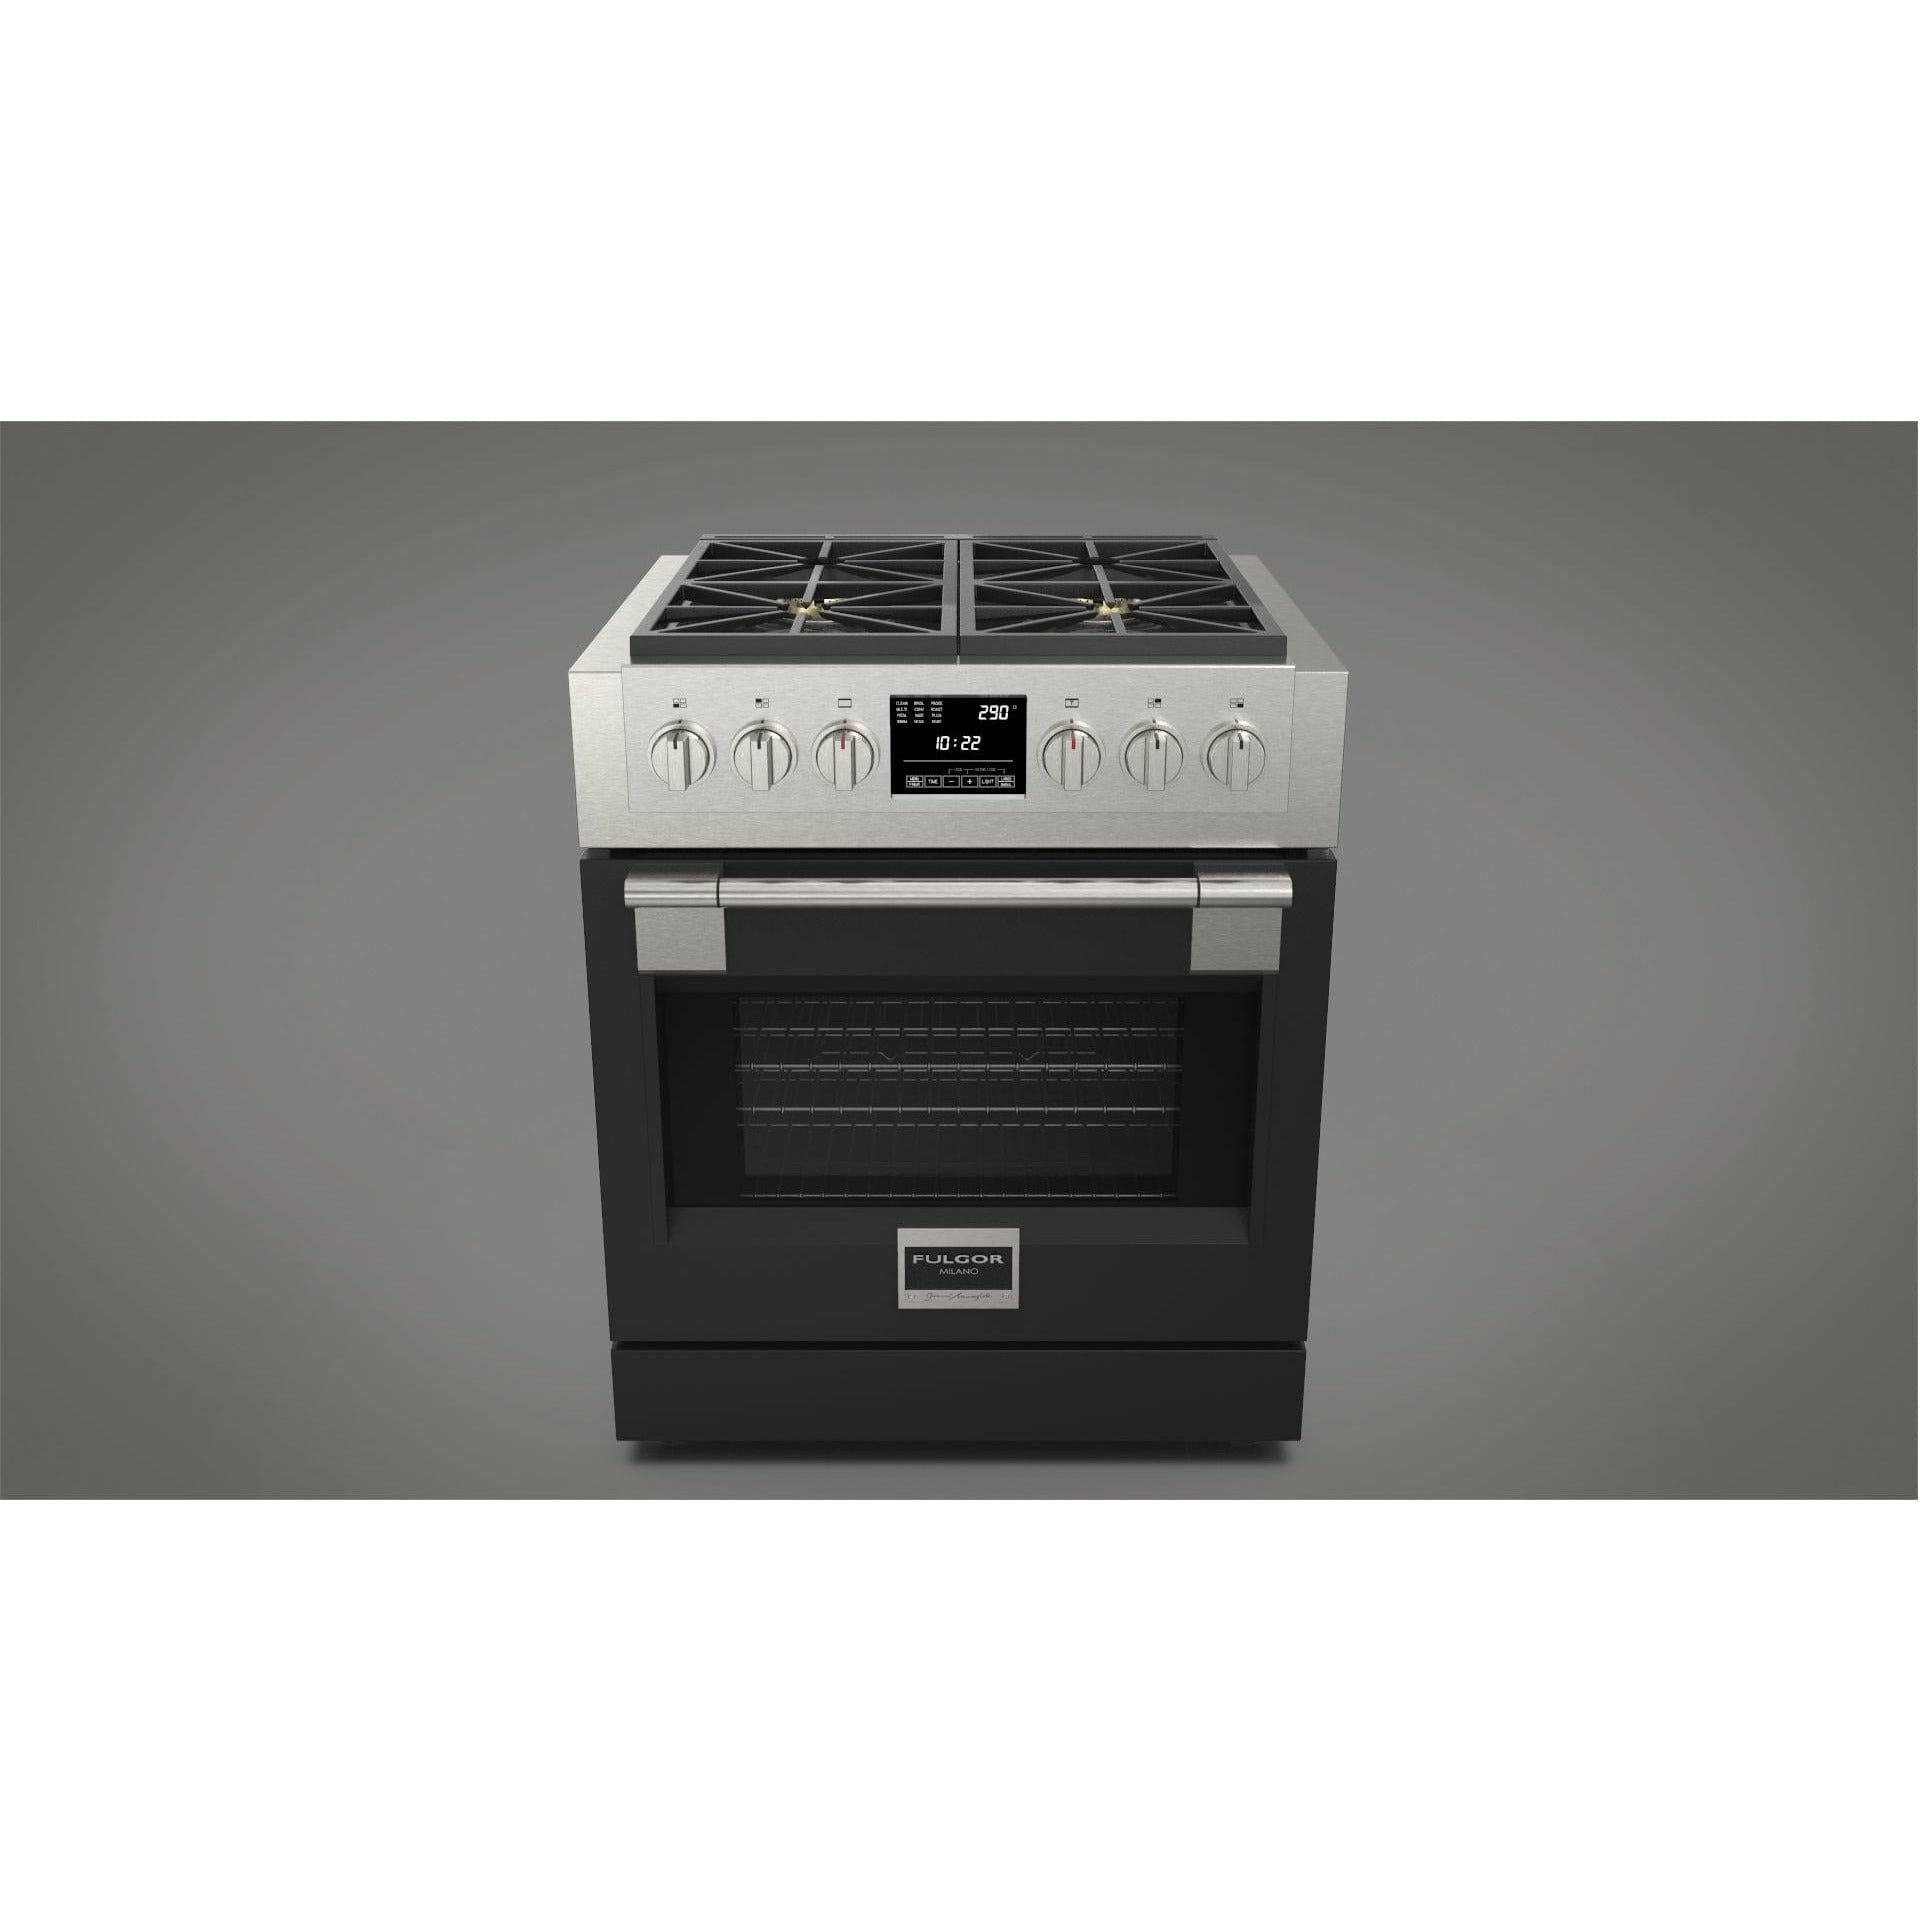 Fulgor Milano 30" Freestanding Dual Fuel Pro Range with 4 18,000-BTU Burners, Stainless Steel - F6PDF304S1 Ranges PDRKIT30MB Luxury Appliances Direct